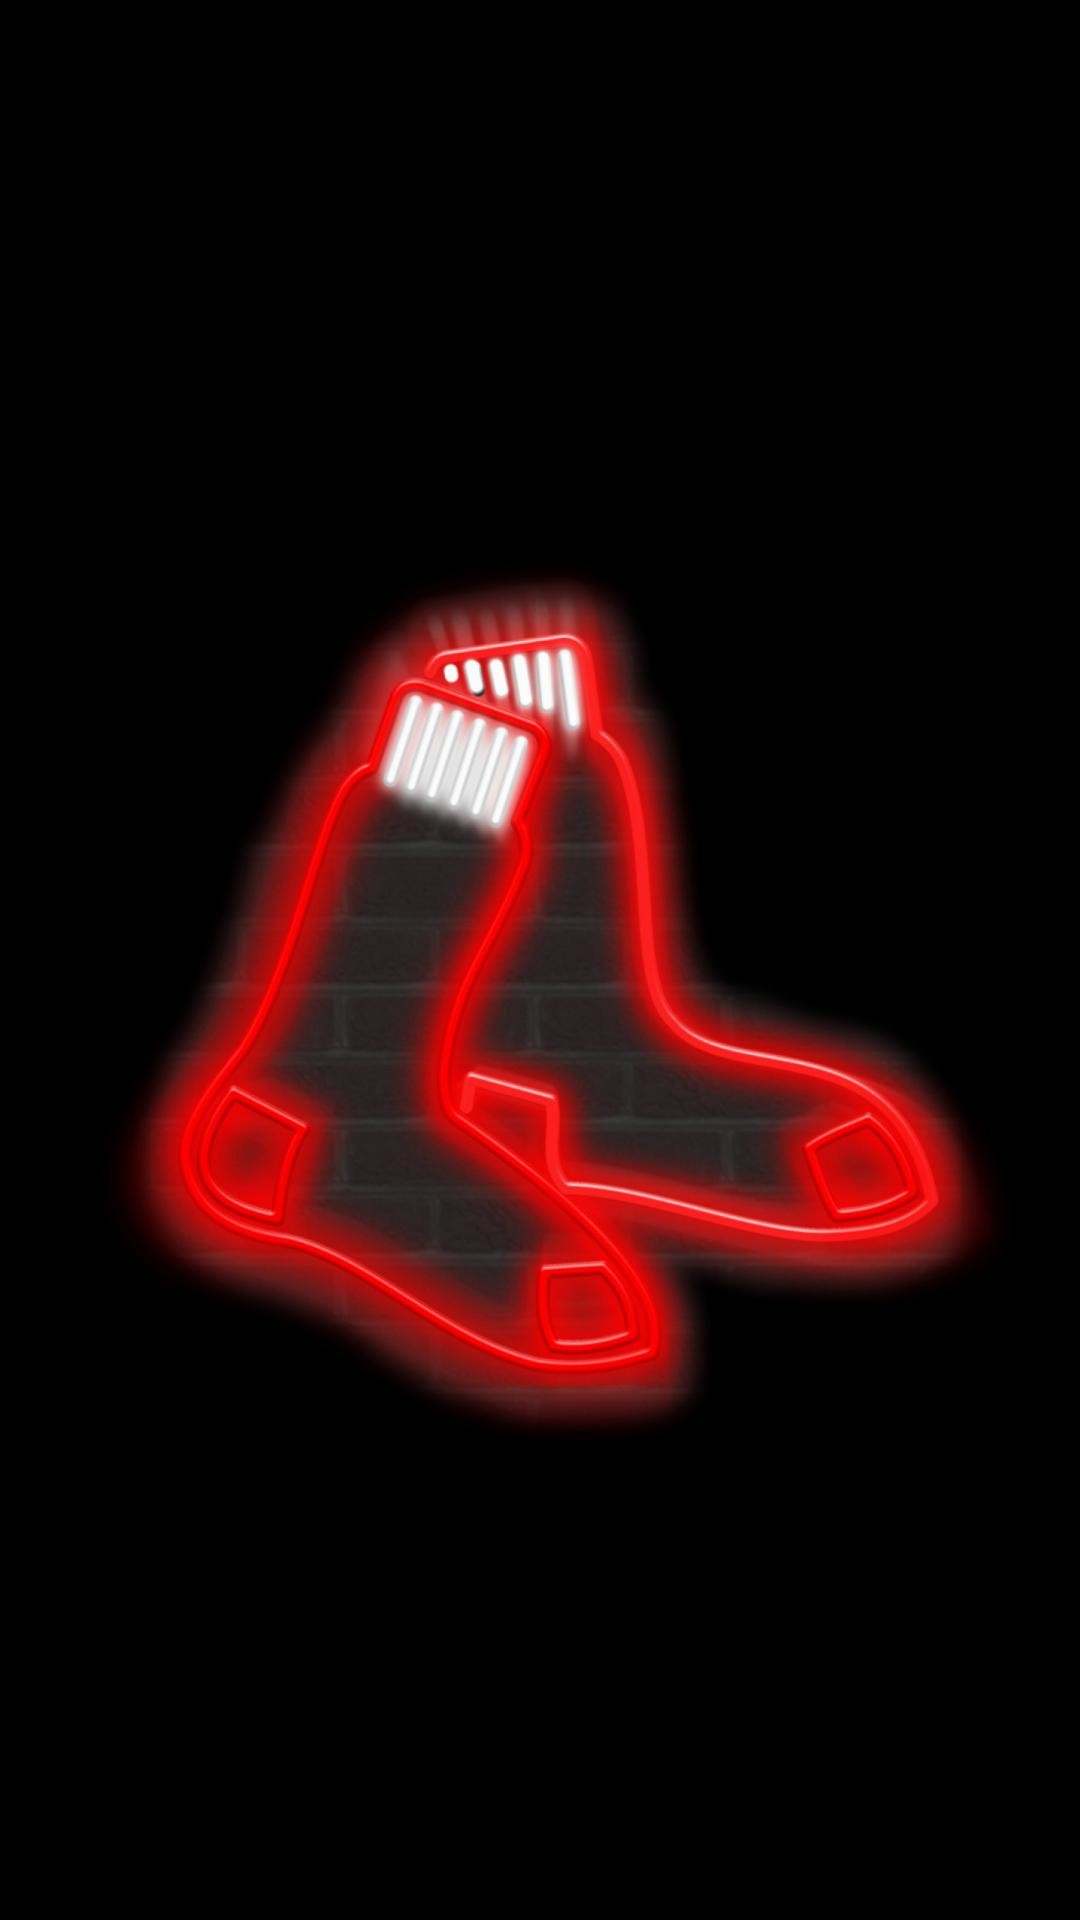 Boston Red Sox iPhone Wallpaper (70+ images)